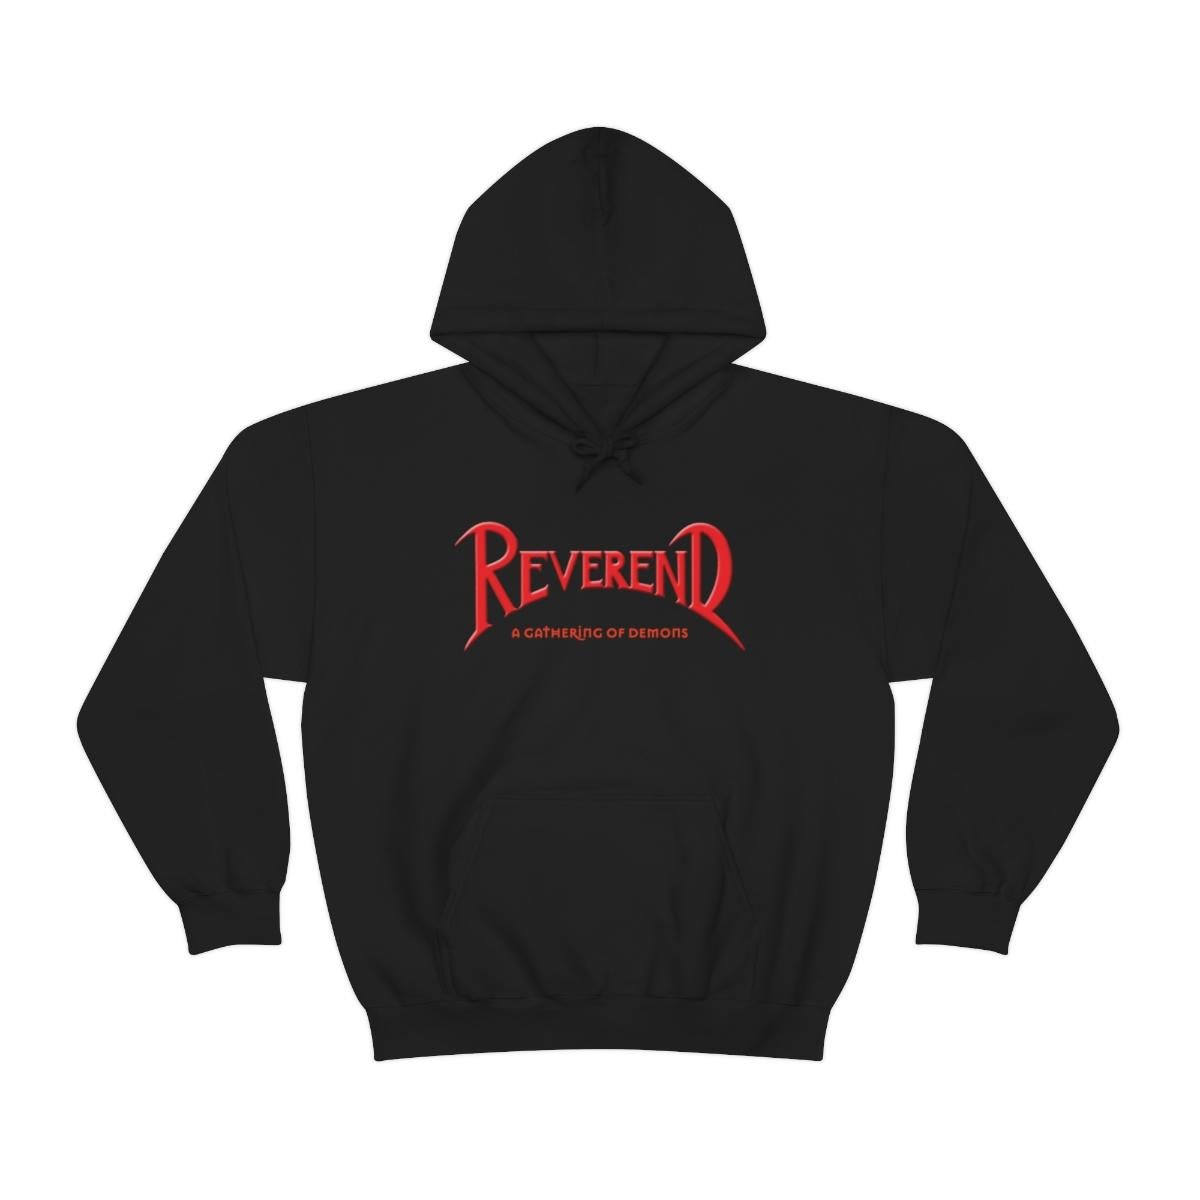 Reverend – A Gathering Of Demons New Cover Pullover Hooded Sweatshirt (2 Sided)